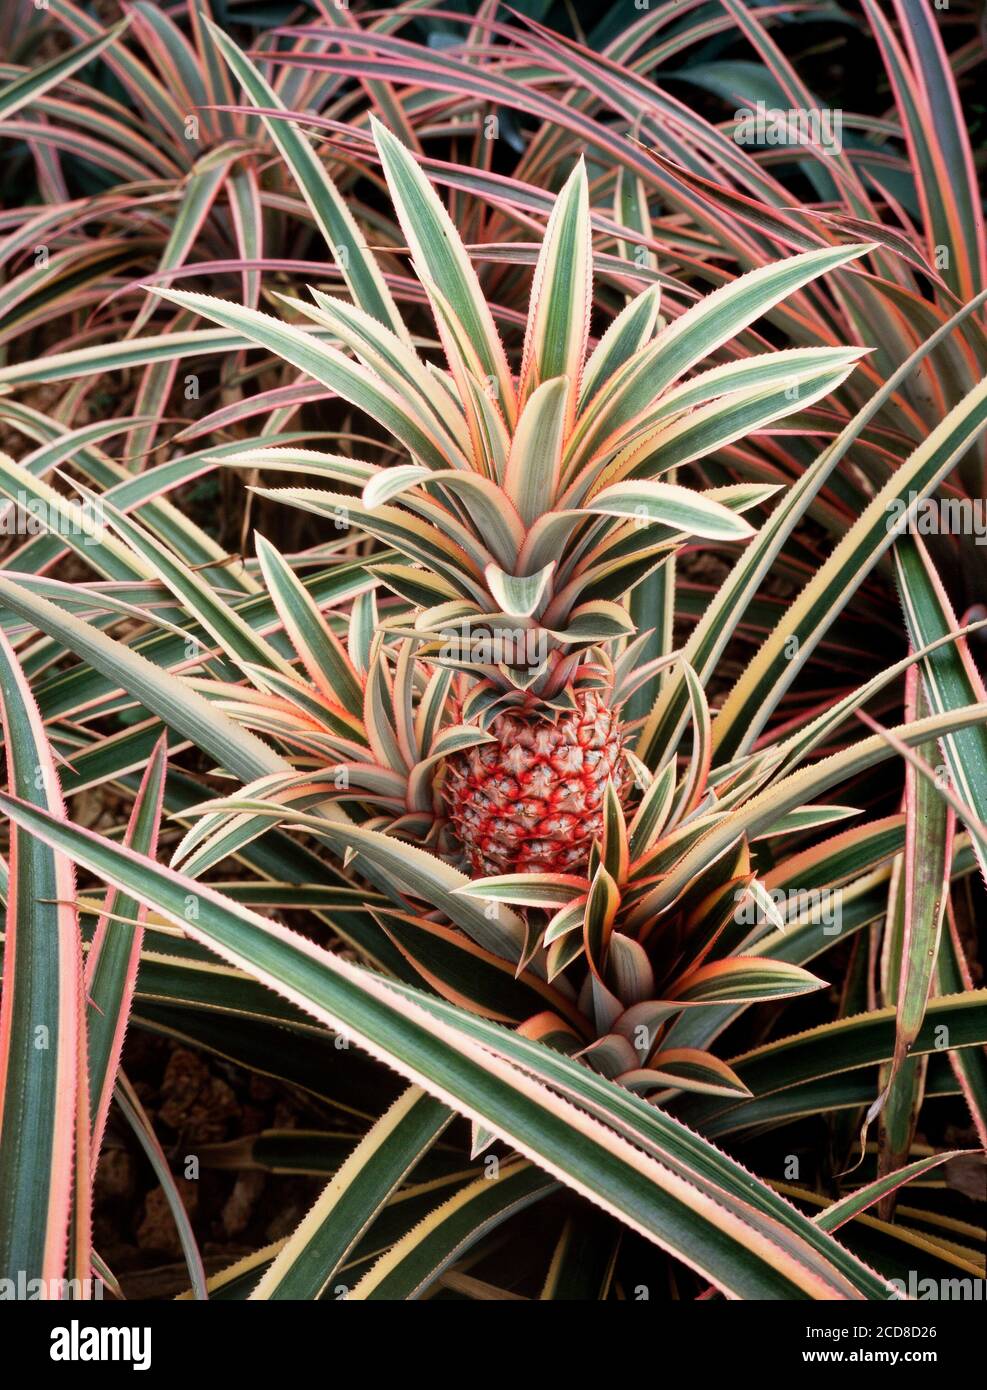 Pineapple fruit, young fruit growing on the plant, Anenas comosus Stock Photo